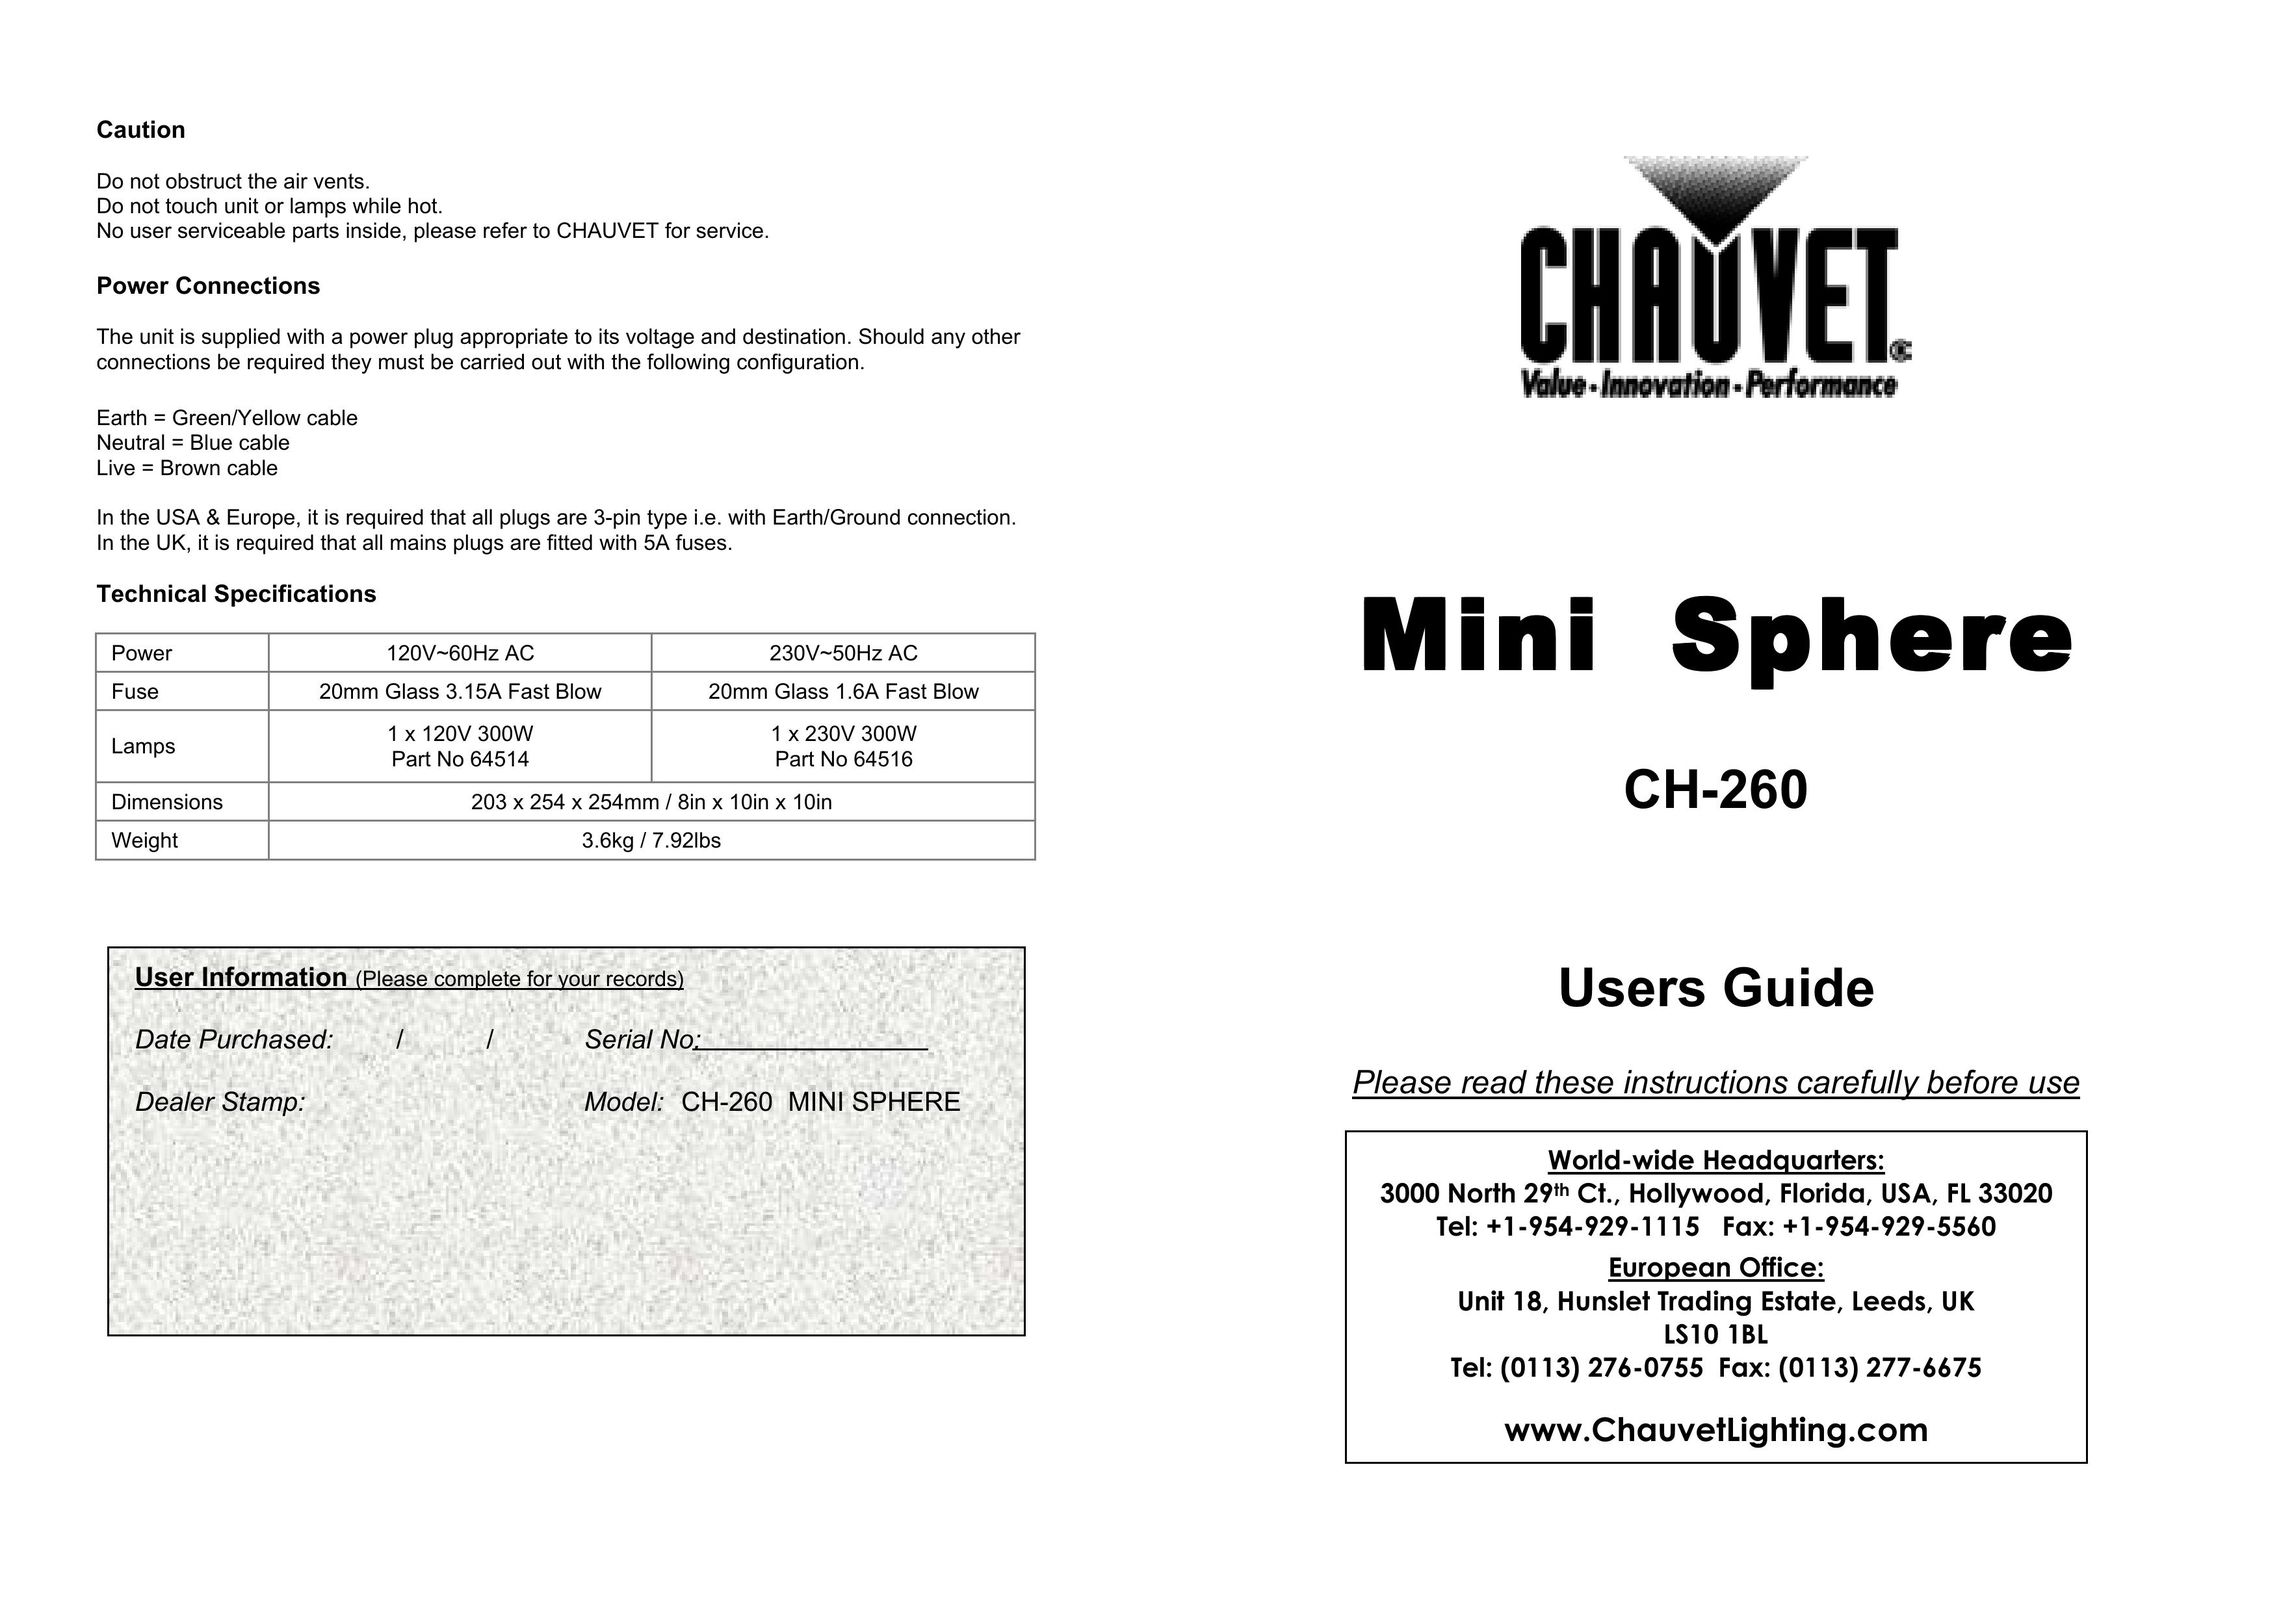 Chauvet CH-260 Indoor Furnishings User Manual